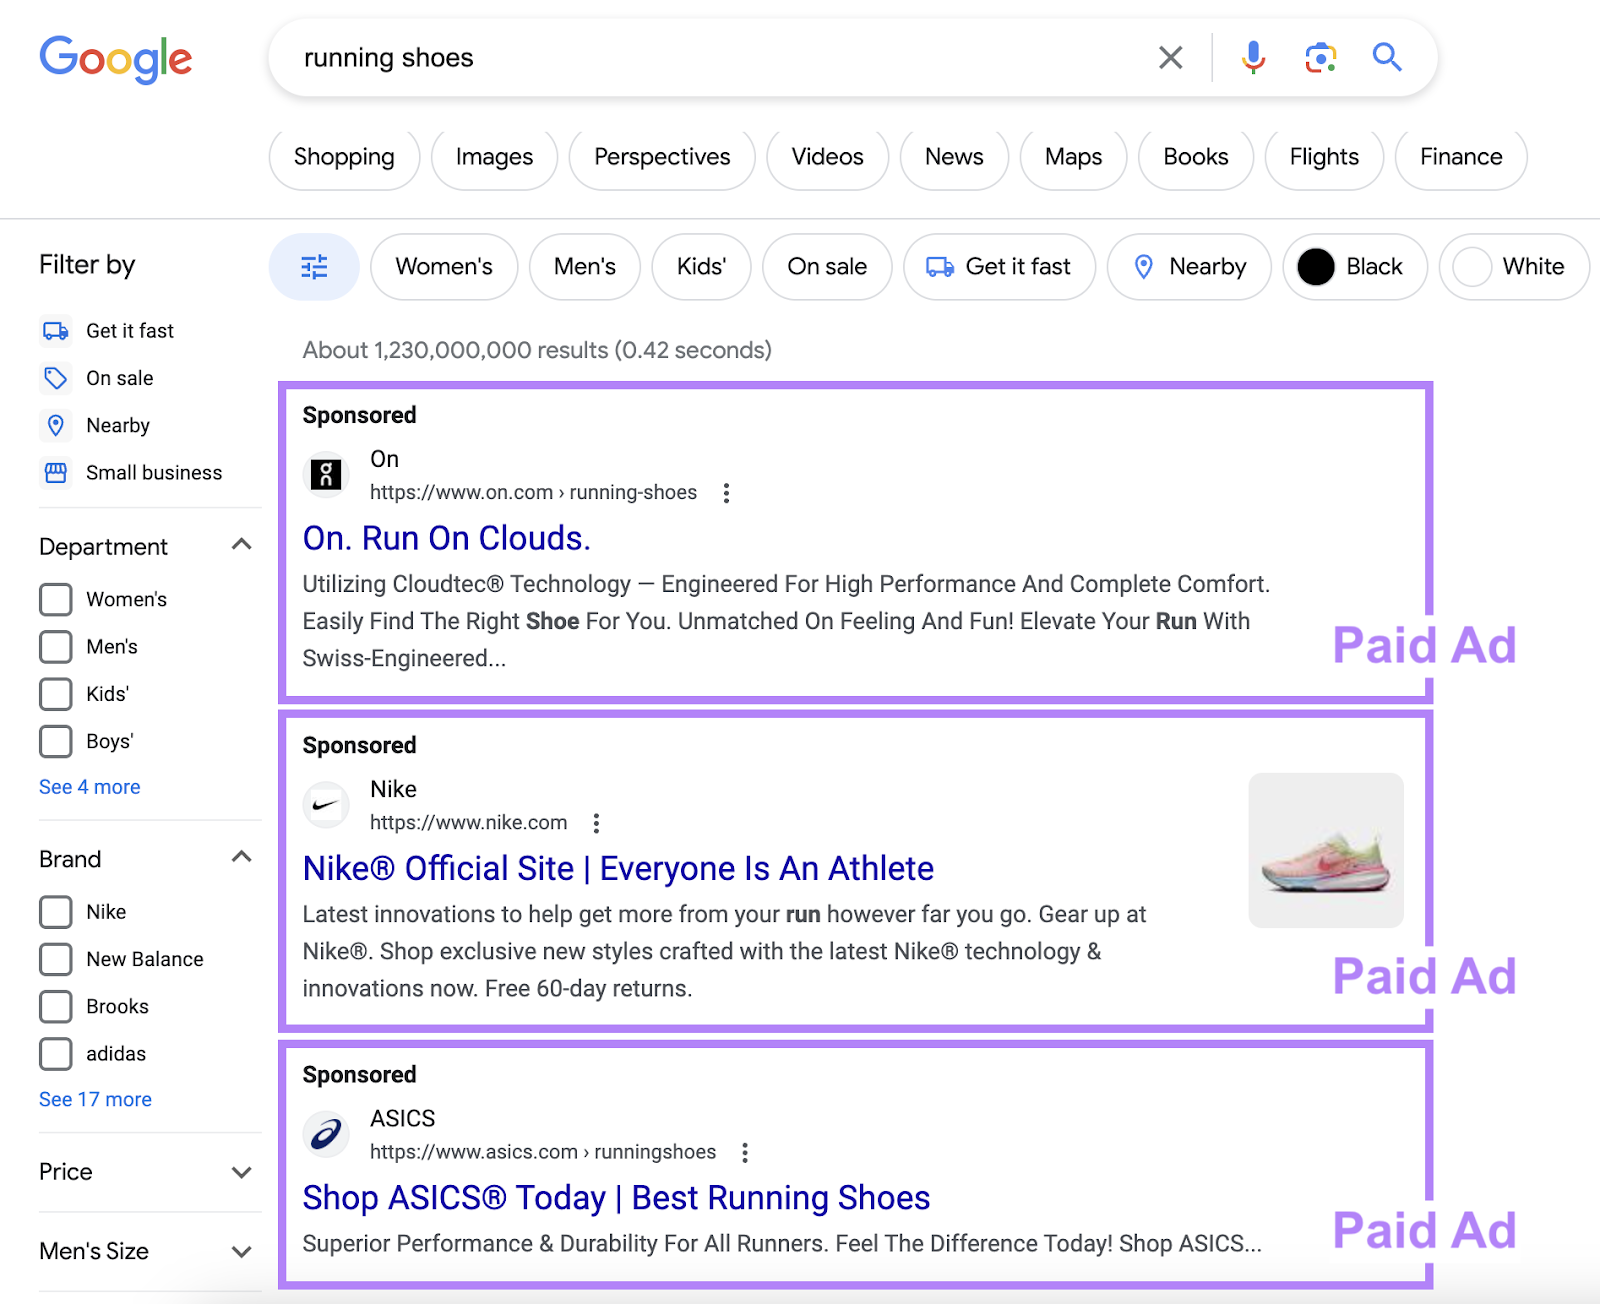 Paid hunt  ads connected  Google's SERP for "running shoes" query